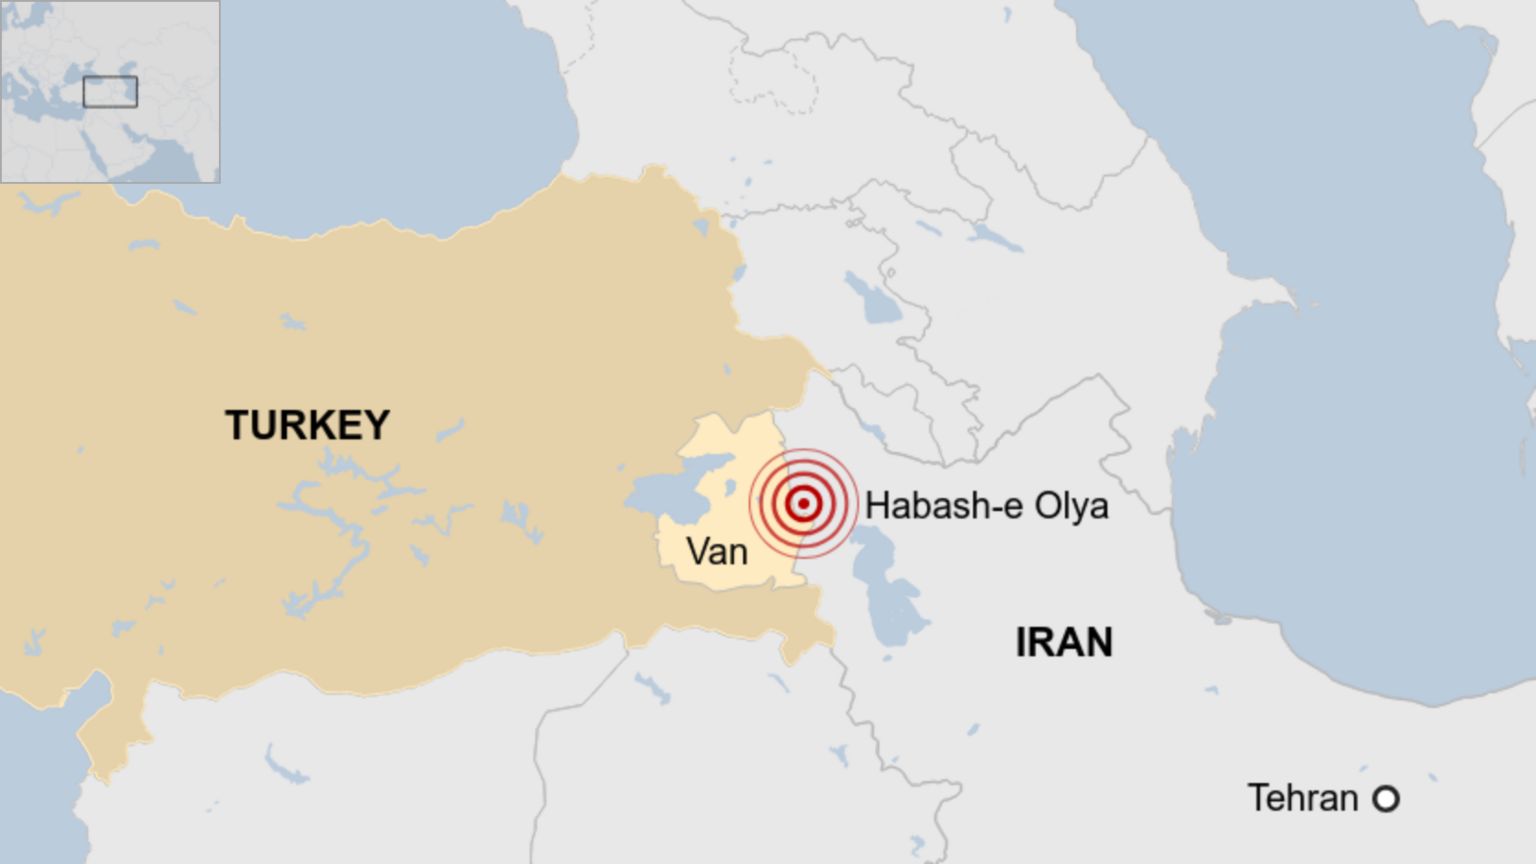 The earthquake caused damage on both sides of the Turkey-Iran border